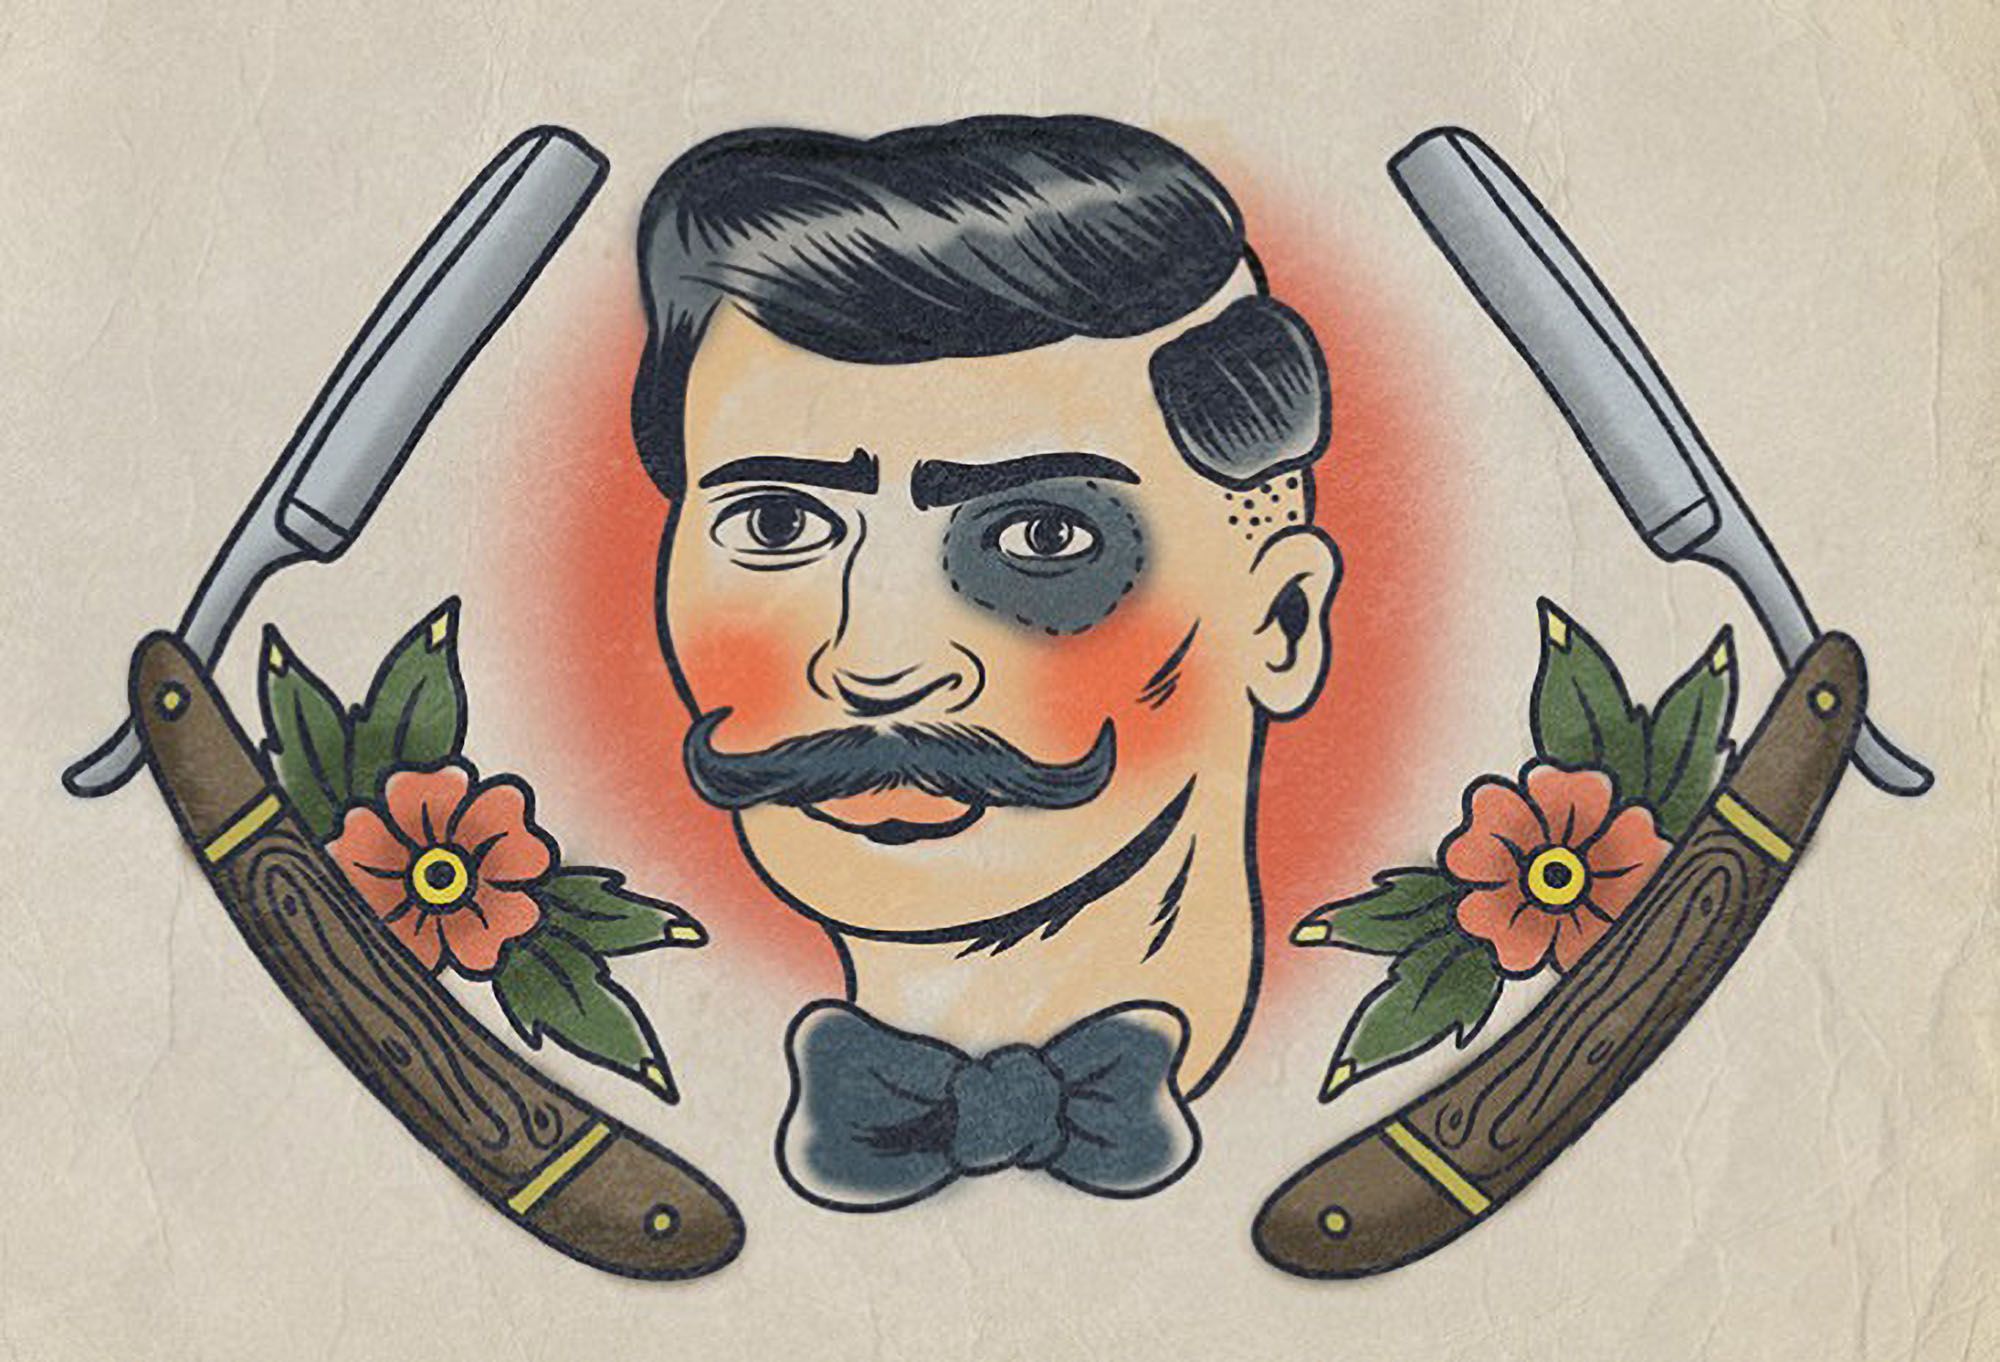 About — Boston Barber & Tattoo Co.